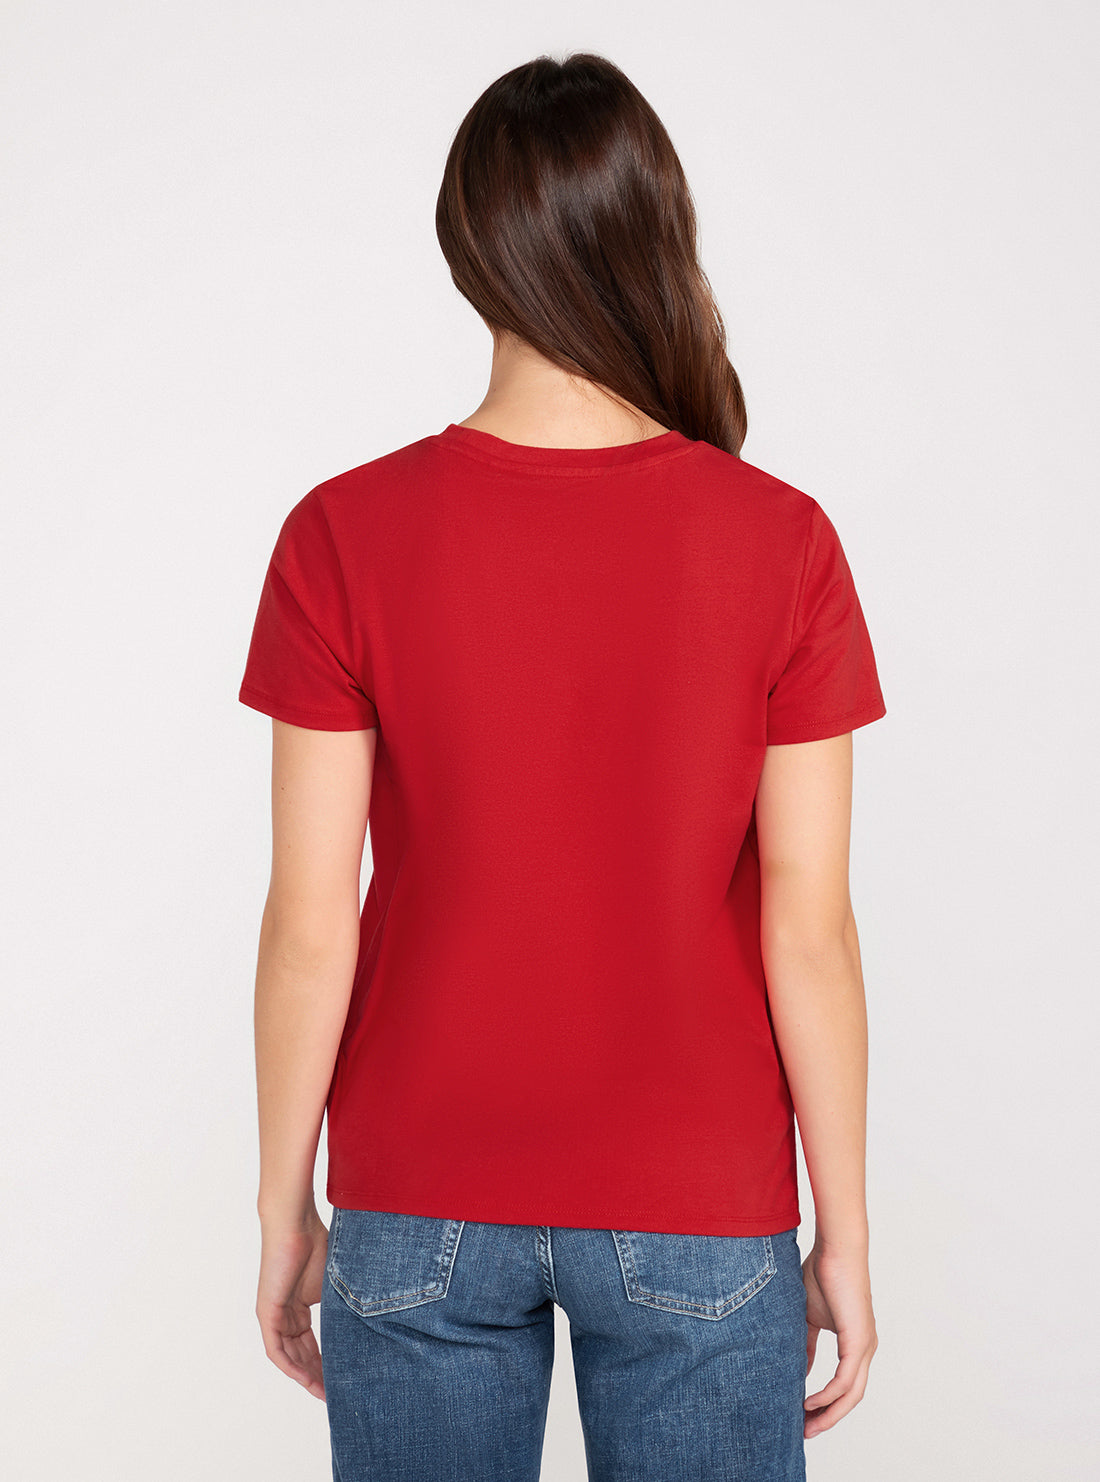 GUESS Red Short Sleeve Flower Logo Easy Tee back view